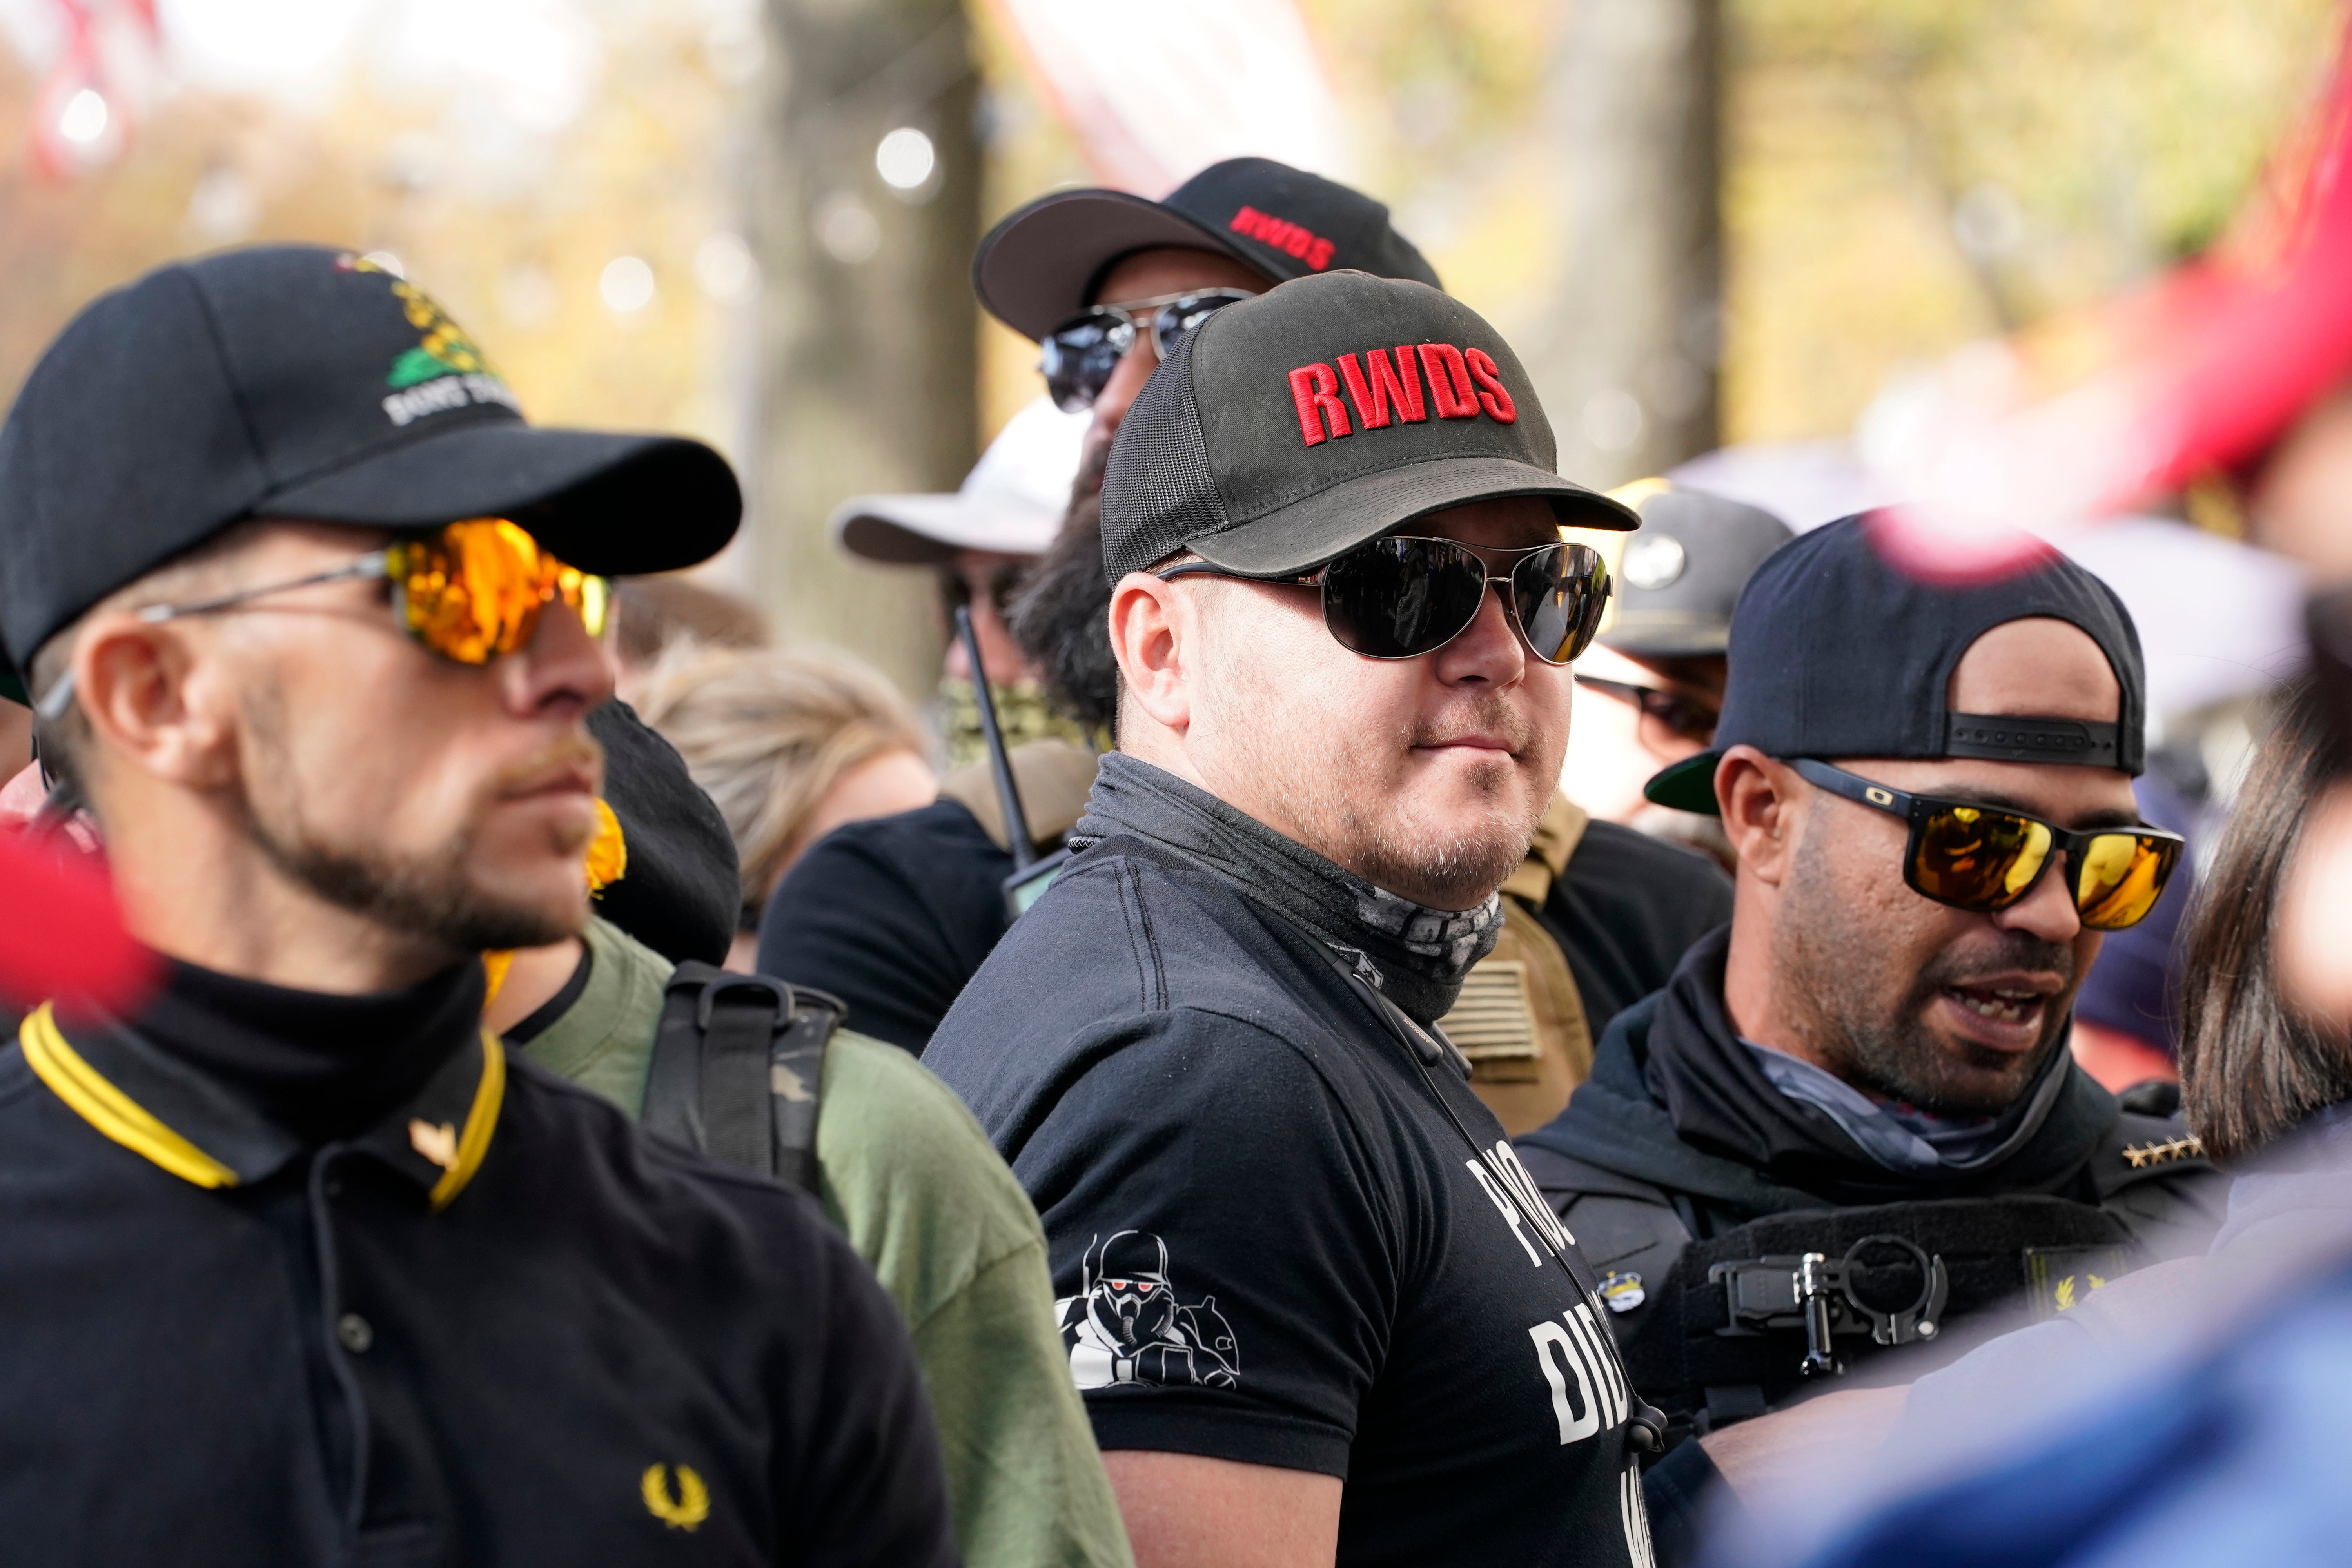 Members of the Proud Boys are photographed with “RWDS” on their hats in 2020.